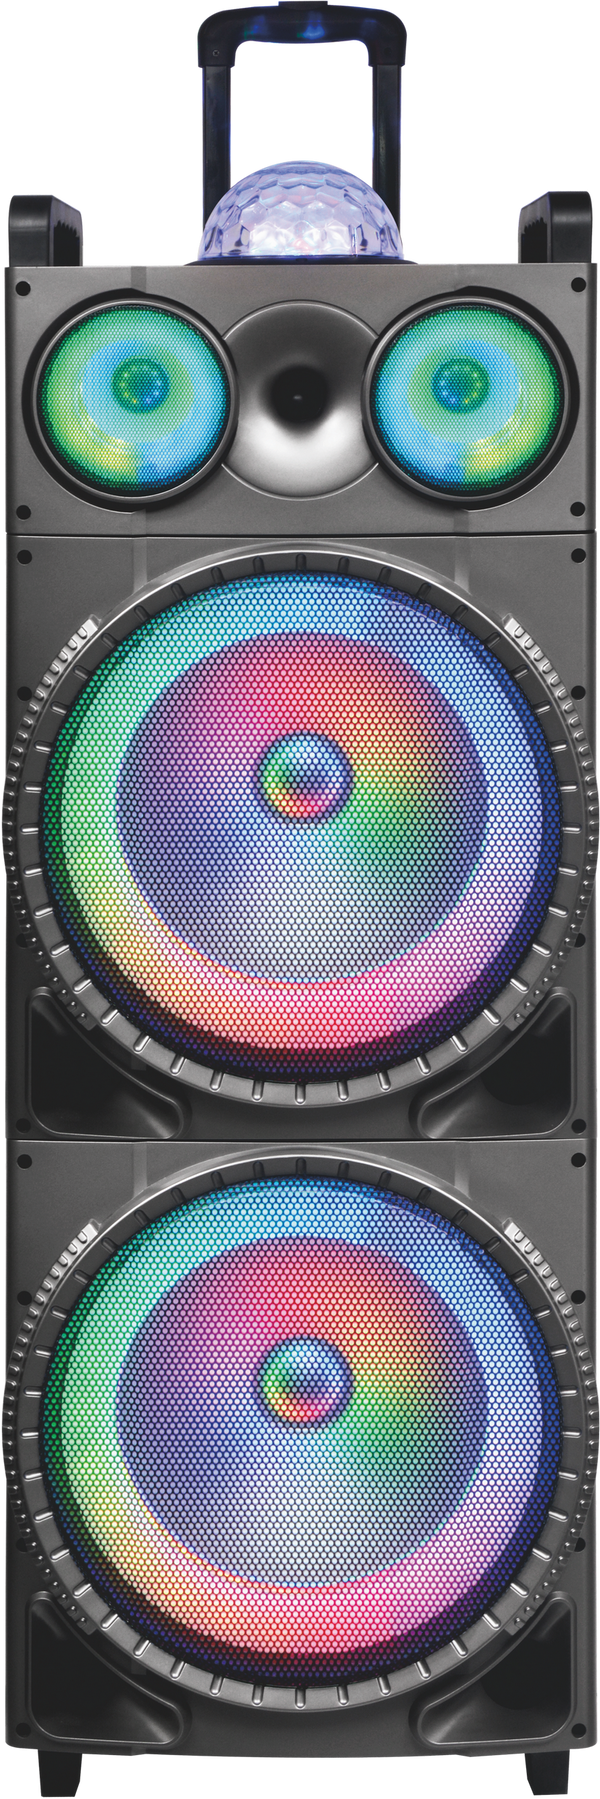 MPD1239B 12" X 2 Karaoke Rechargeable Speaker with dancing lights around the woofer, mic & remote control